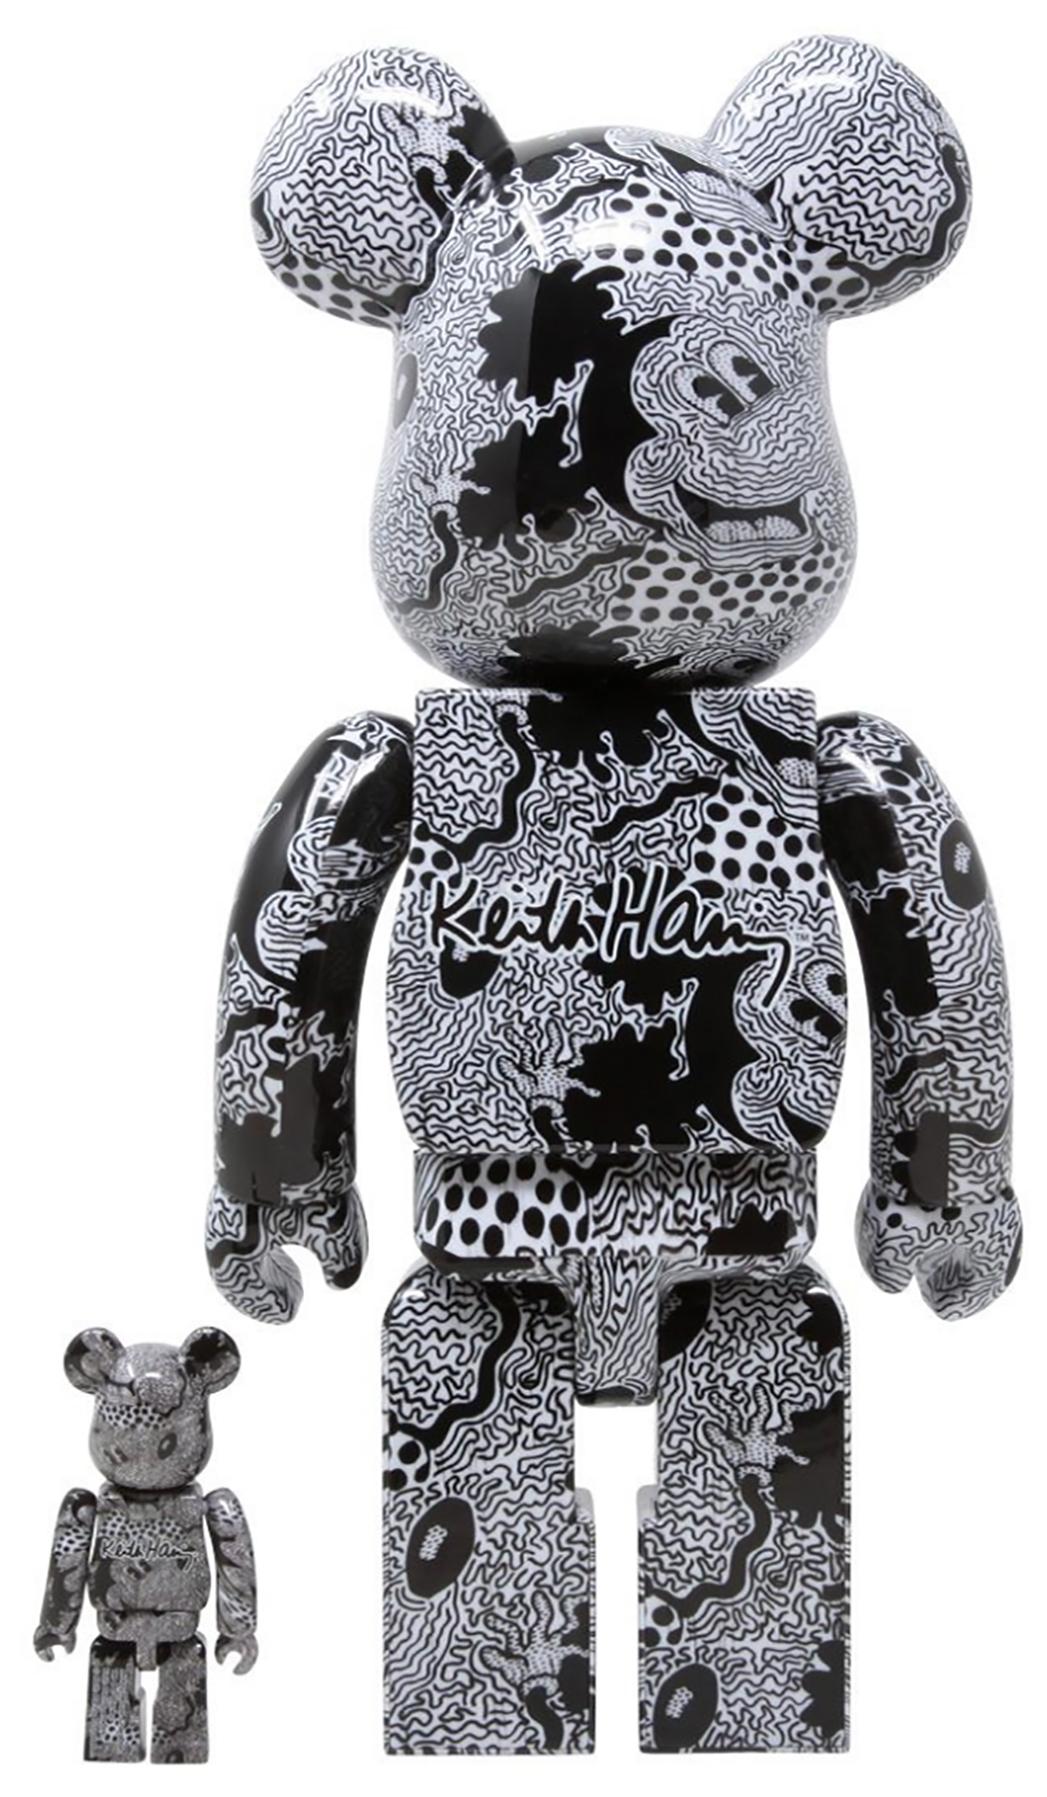 Erzeugnis aus Bearbrick 400 % Companion (Haring Mickey Mouse BE@RBRICK) von Keith Haring (Pop-Art), Print, von (after) Keith Haring